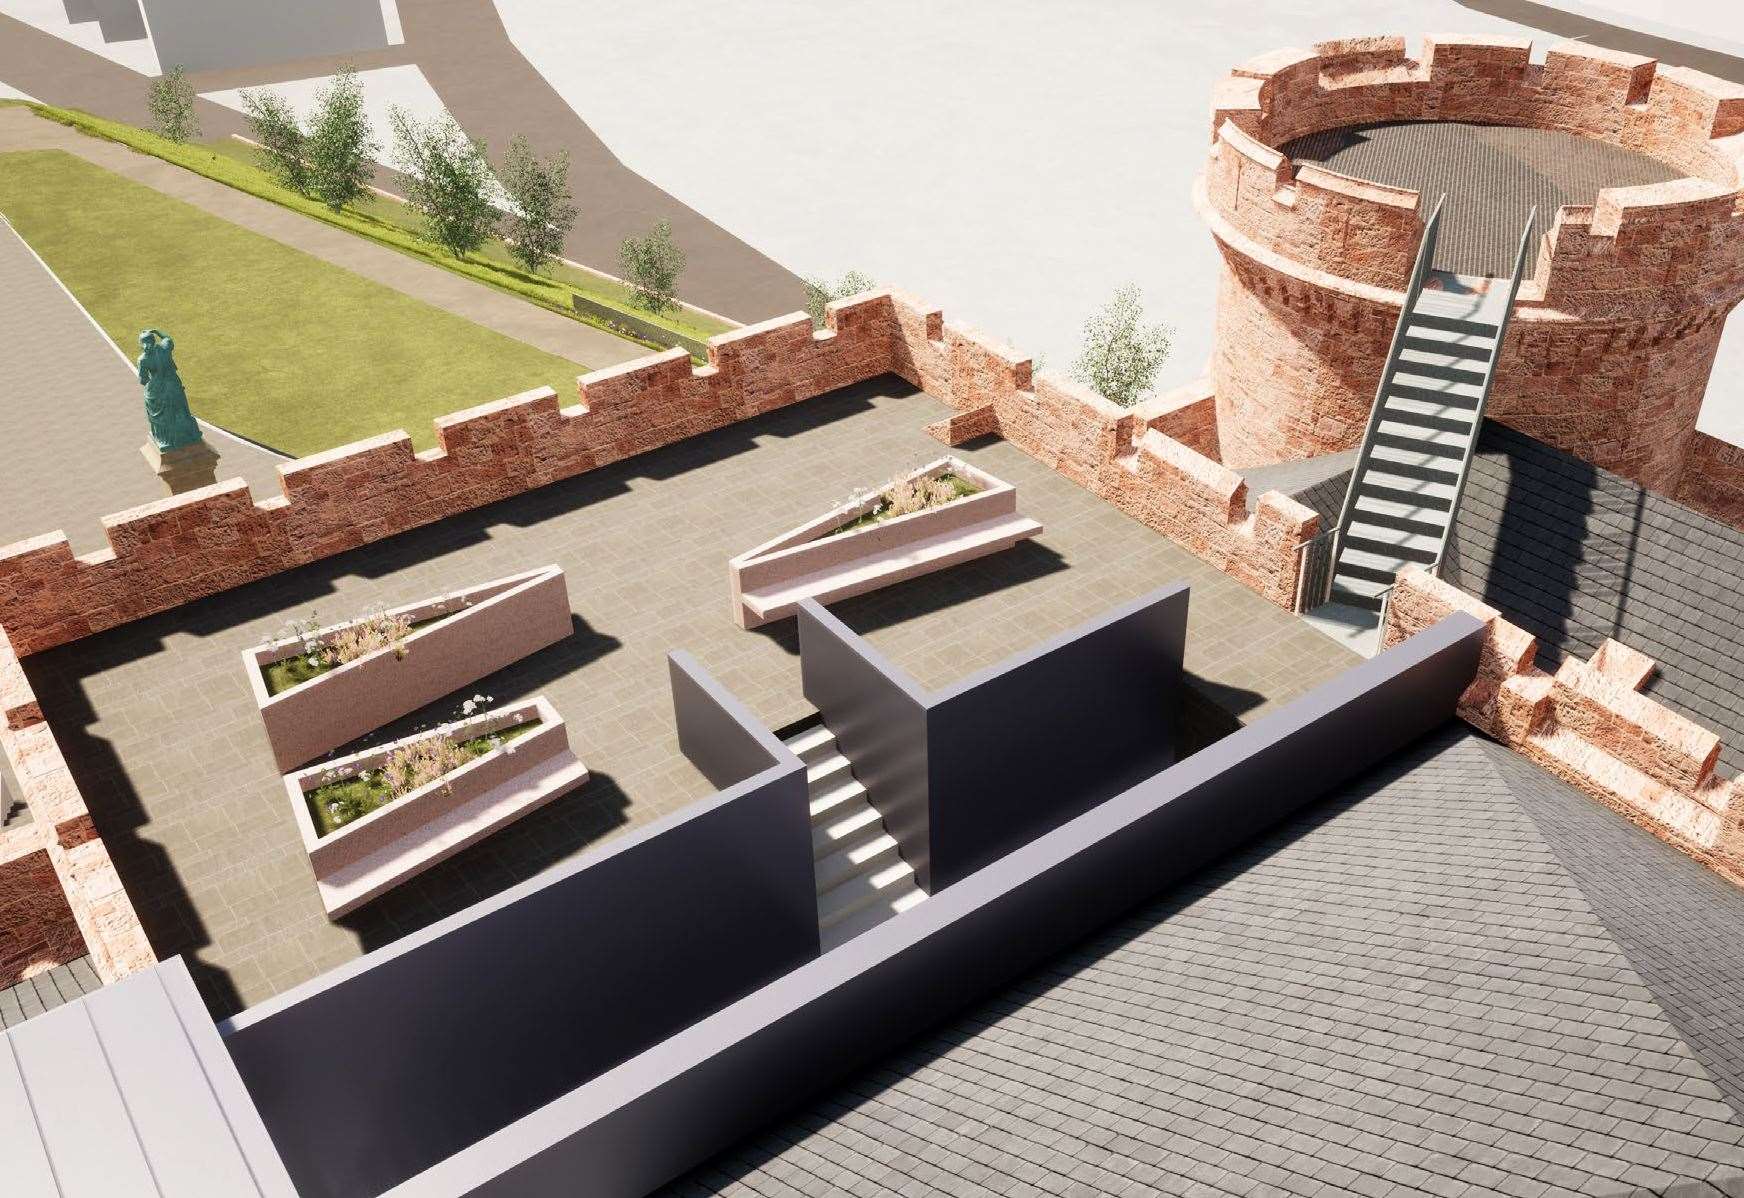 A bird's eye view of the proposed new roof terrace at Inverness Castle.